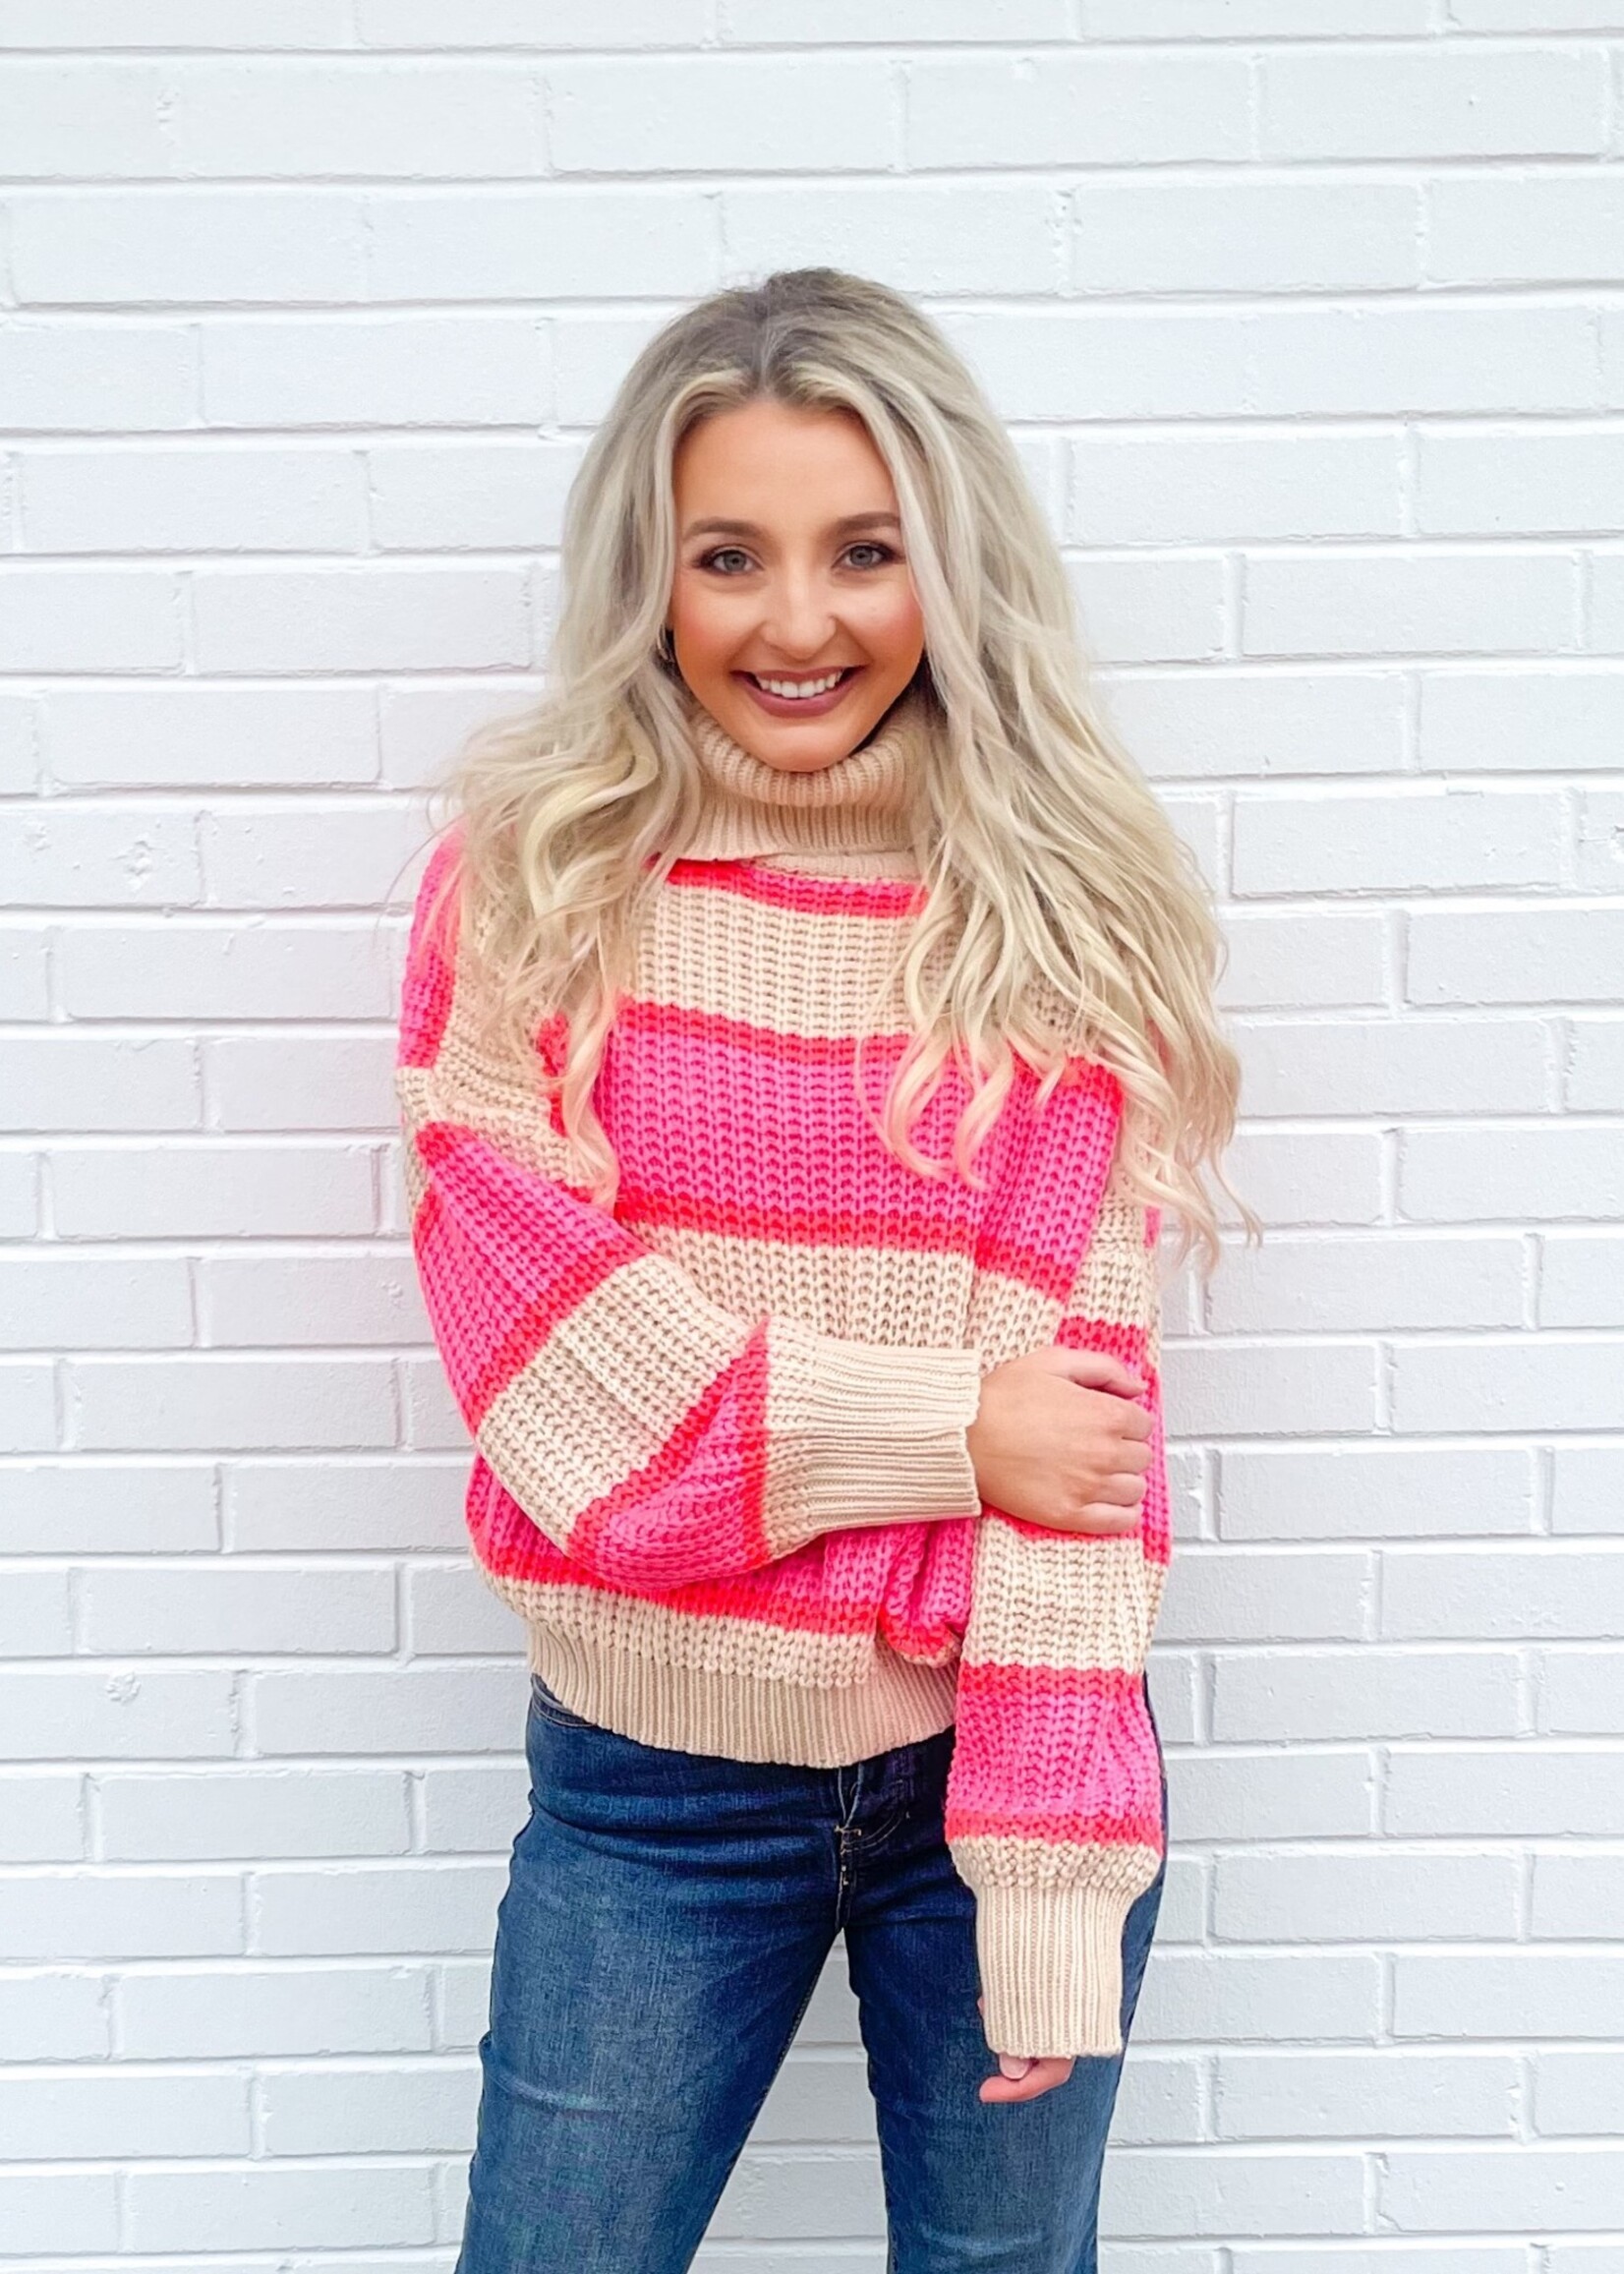 Bloom and Company Hot Pink and Taupe Turtleneck Sweater